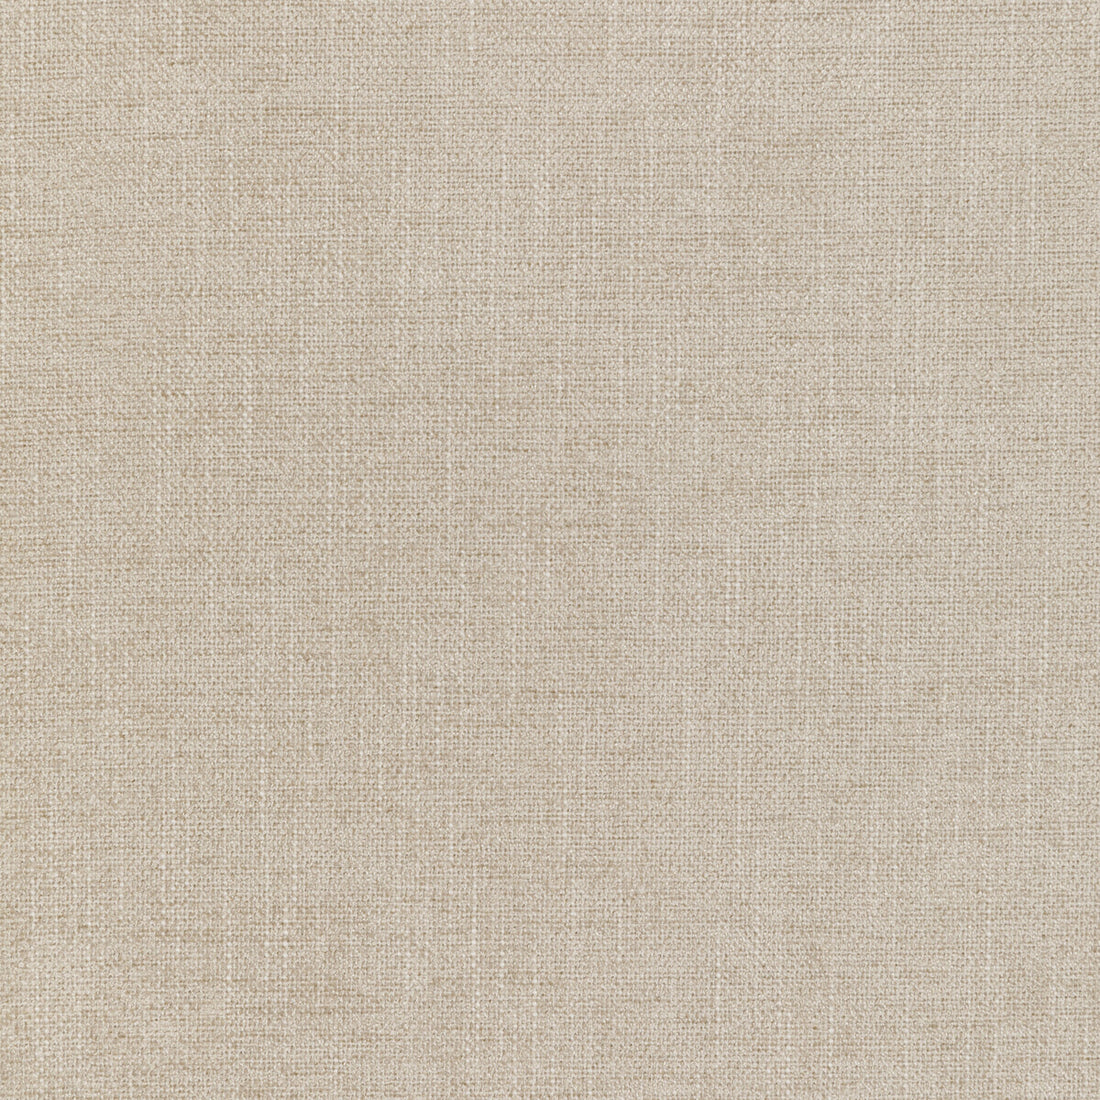 Kravet Smart fabric in 35973-1 color - pattern 35973.1.0 - by Kravet Smart in the Performance Crypton Home collection